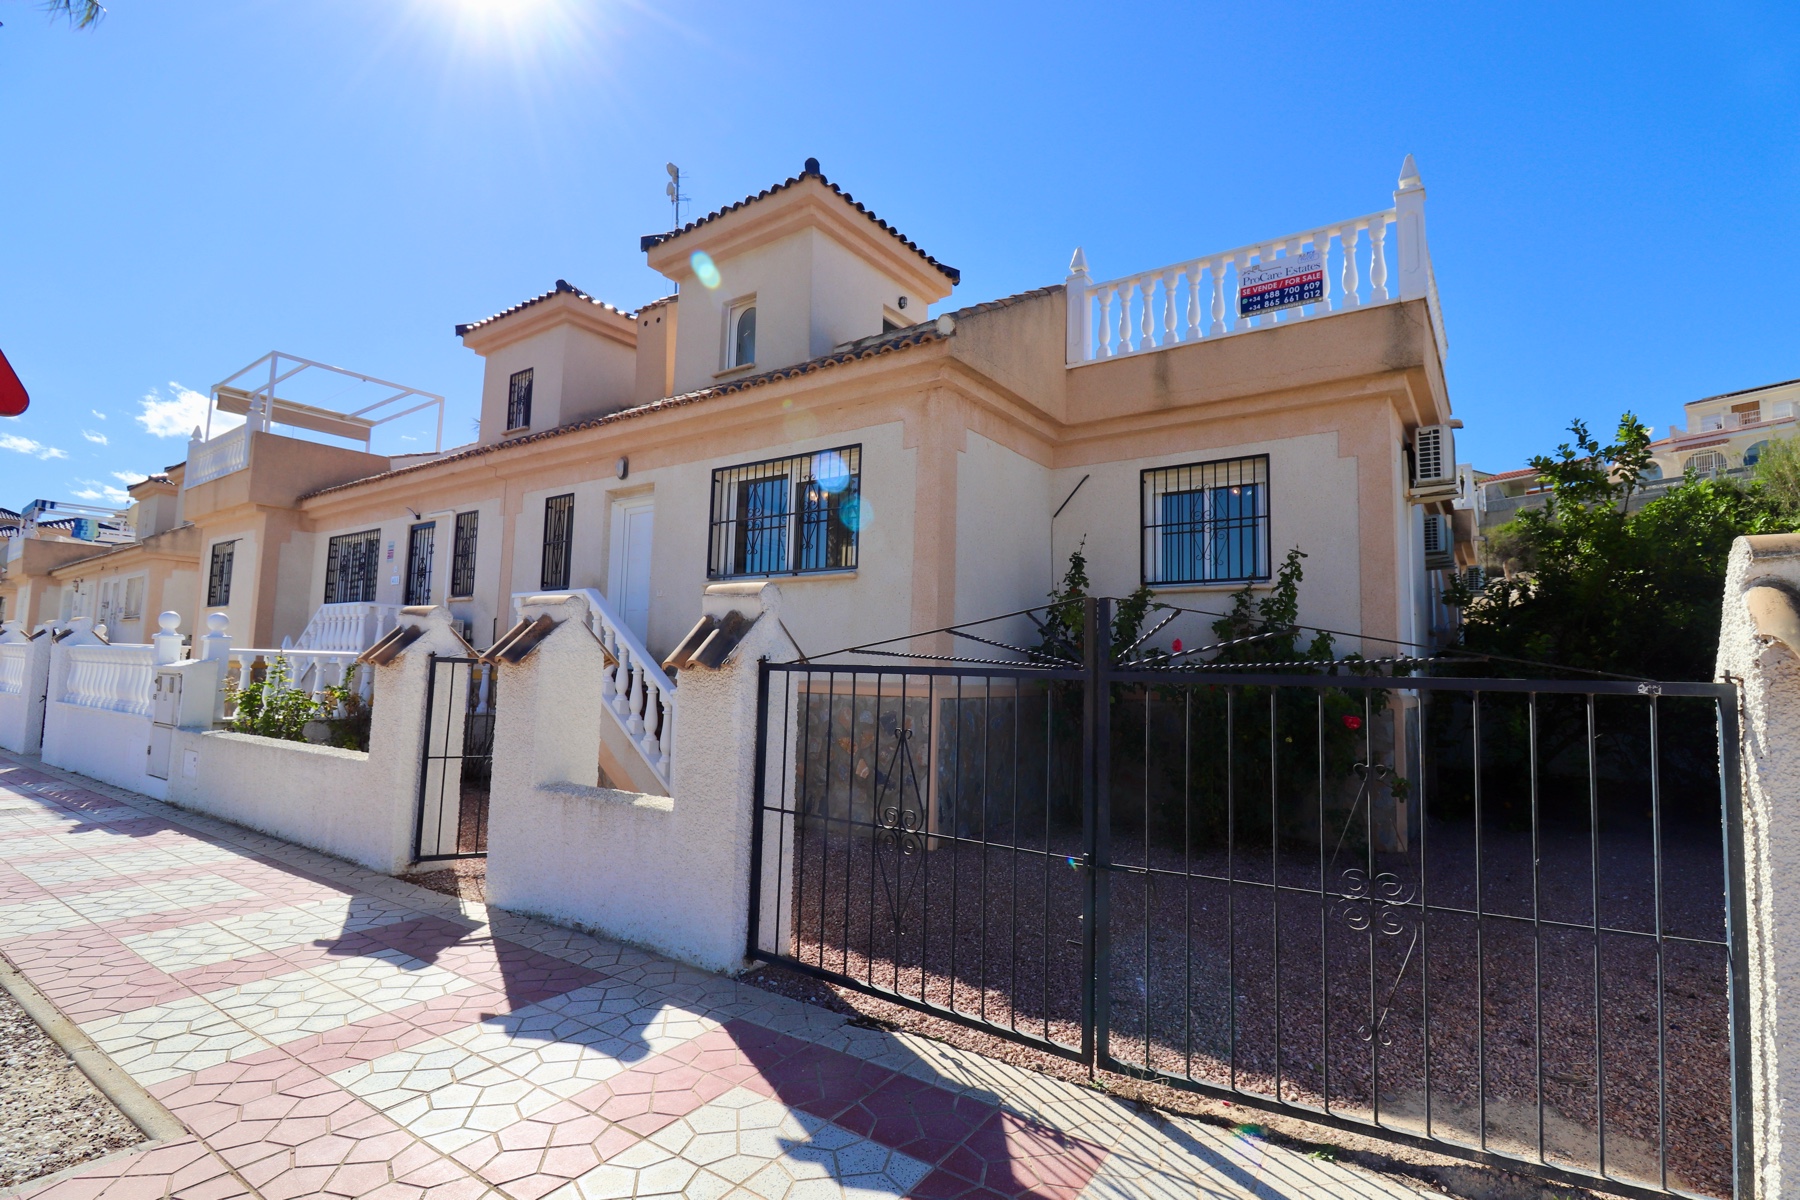 For sale: 2 bedroom house / villa in Rojales